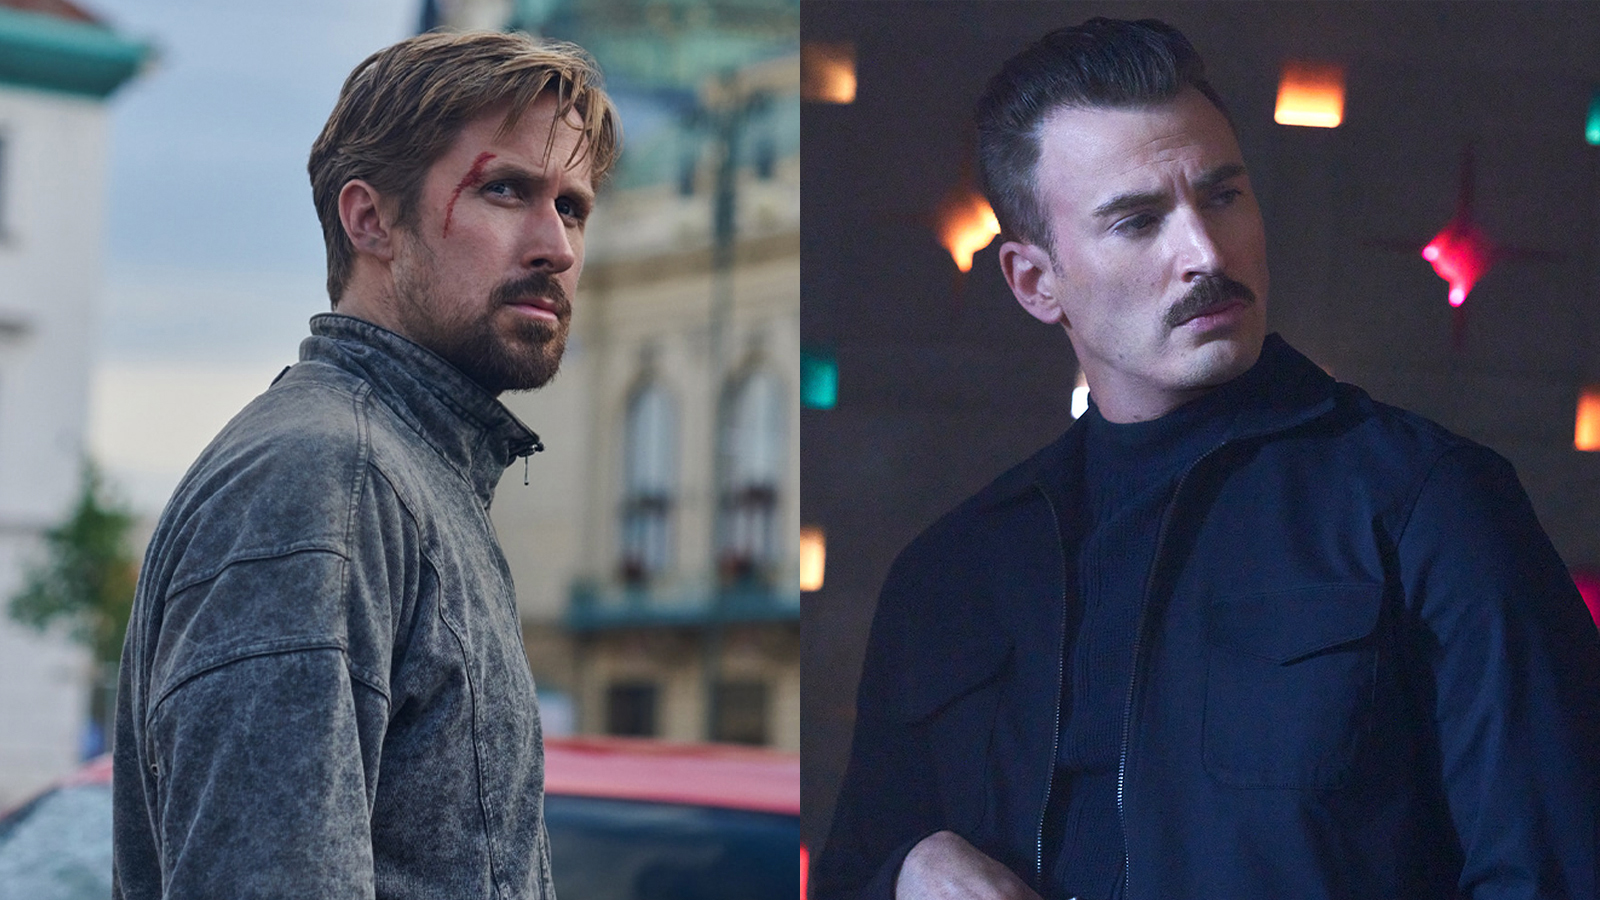 Ryan Gosling & Chris Evans Have A Serious Bromance In The Gray Man